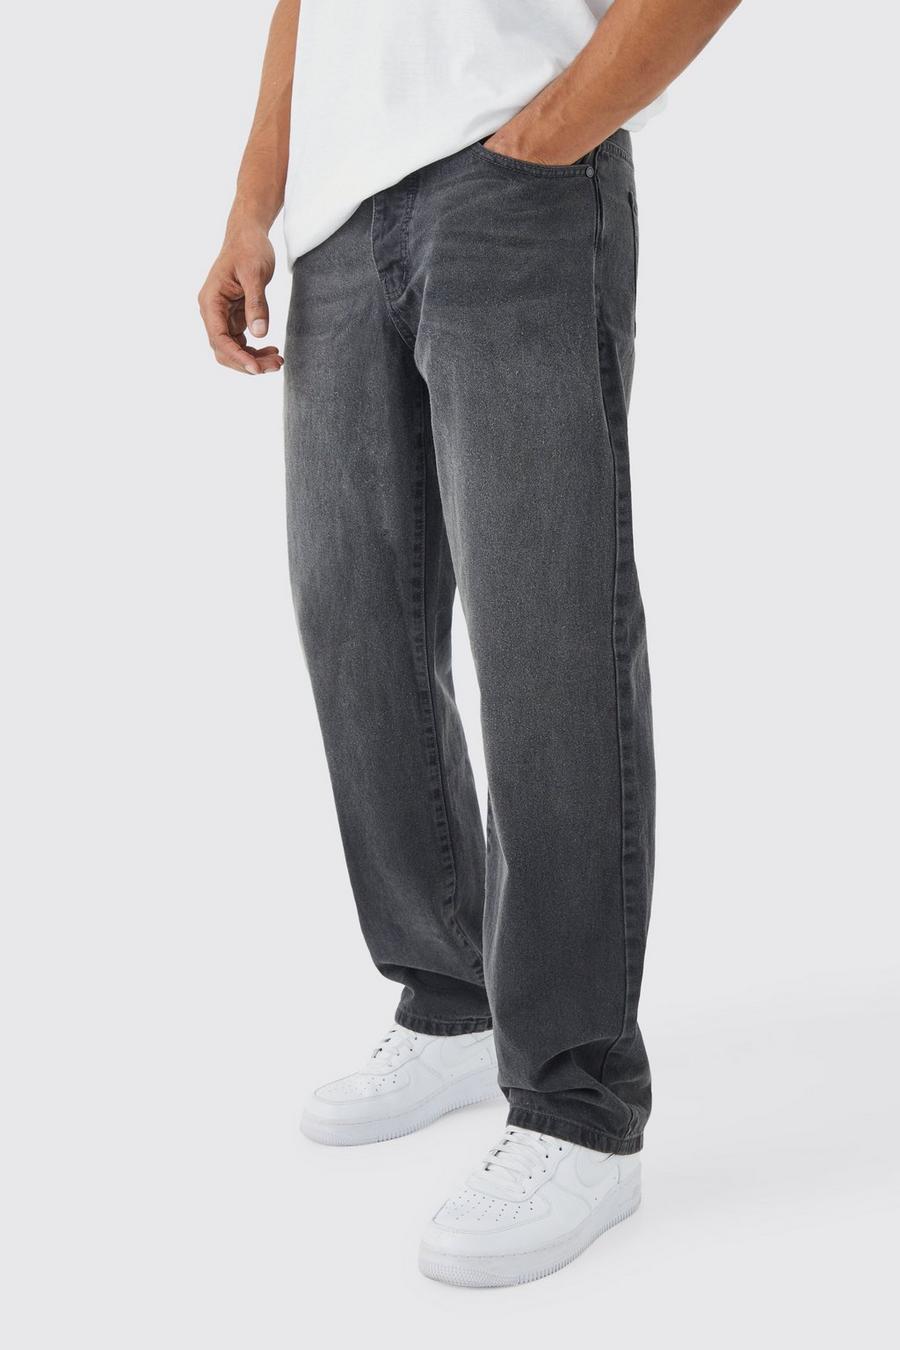 Charcoal grey Baggy Jeans